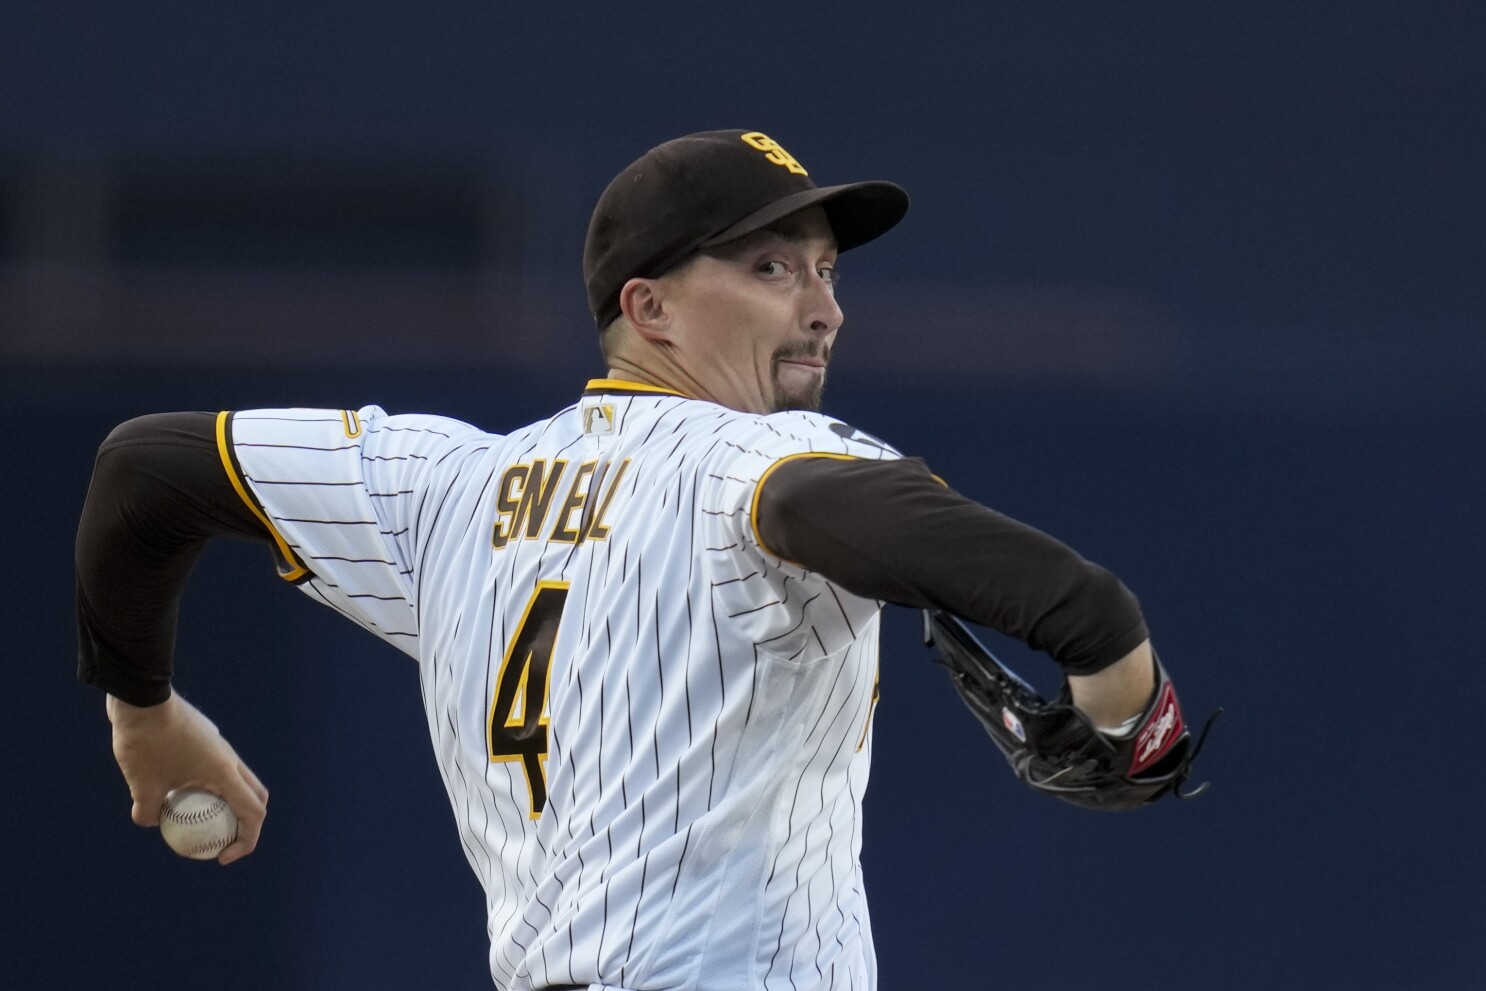 Blake Snell shines as Padres stump Mets